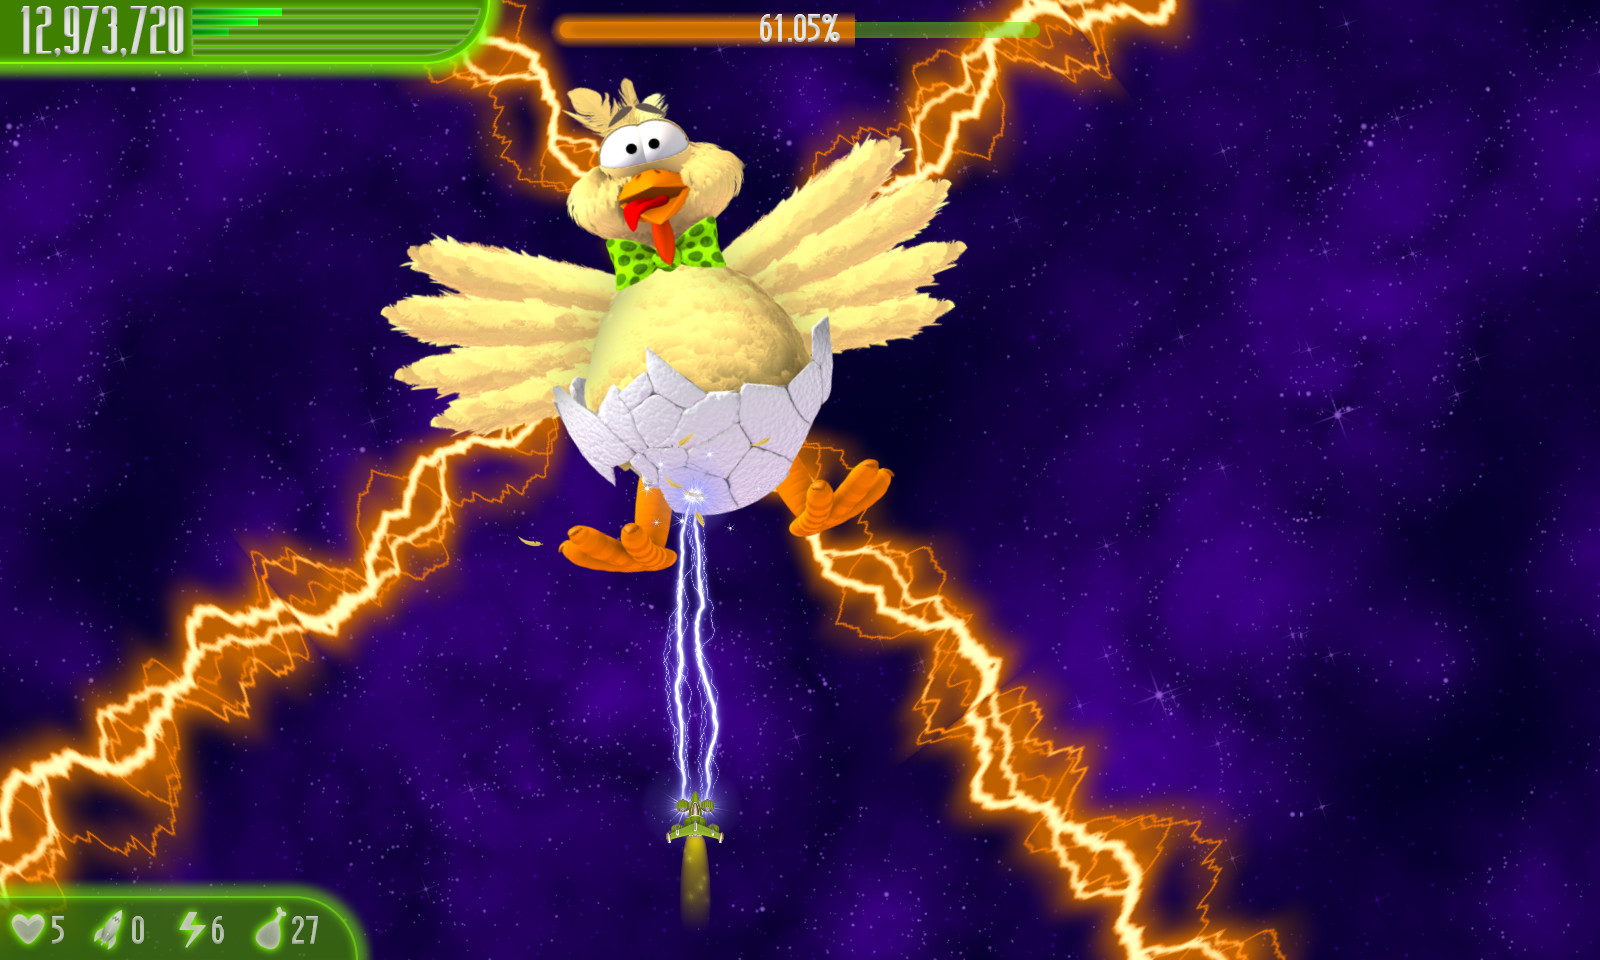 chicken invaders 1 game free download